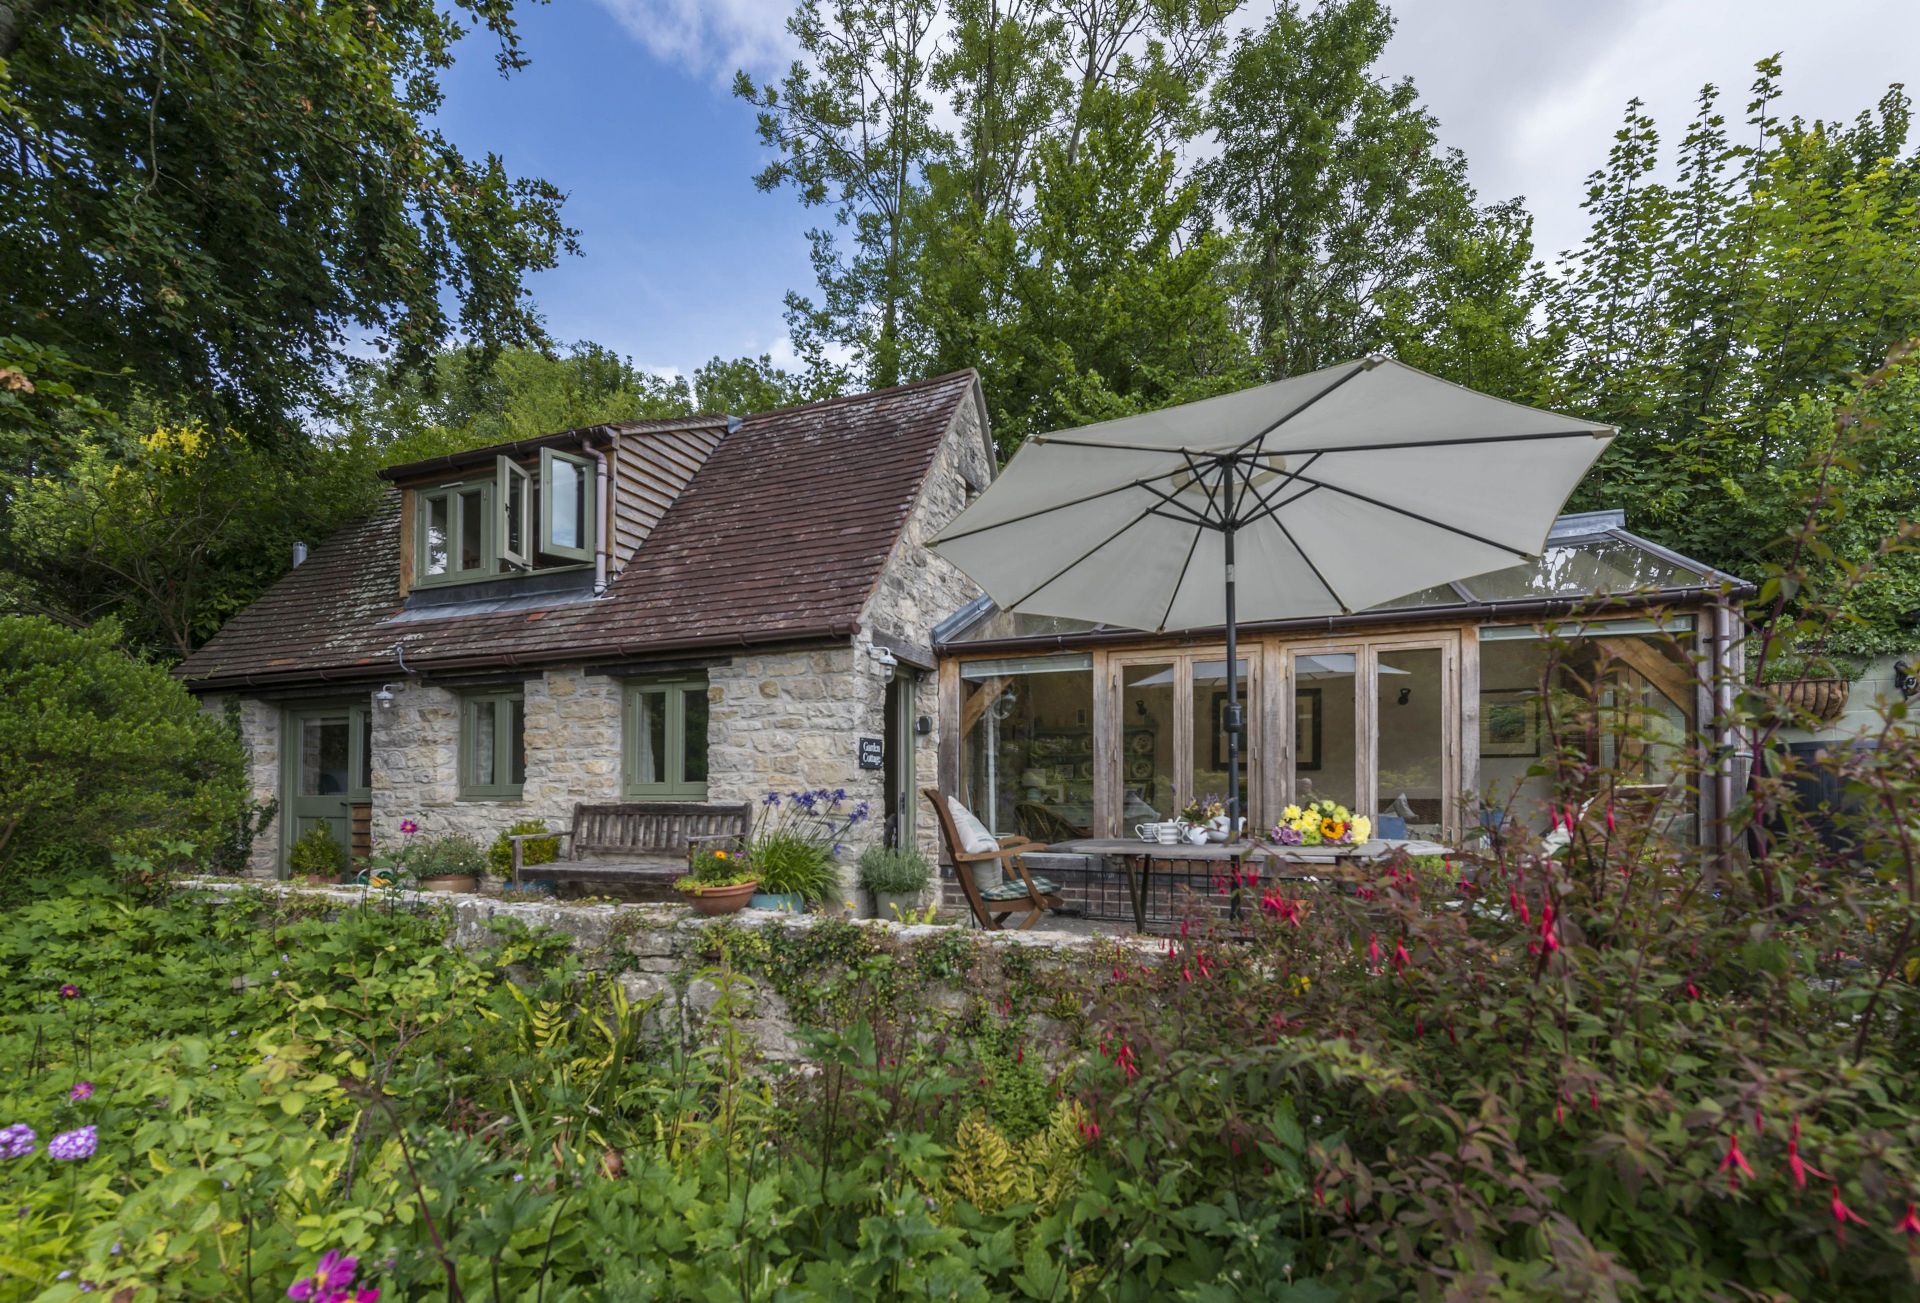 Details about a cottage Holiday at Garden Cottage